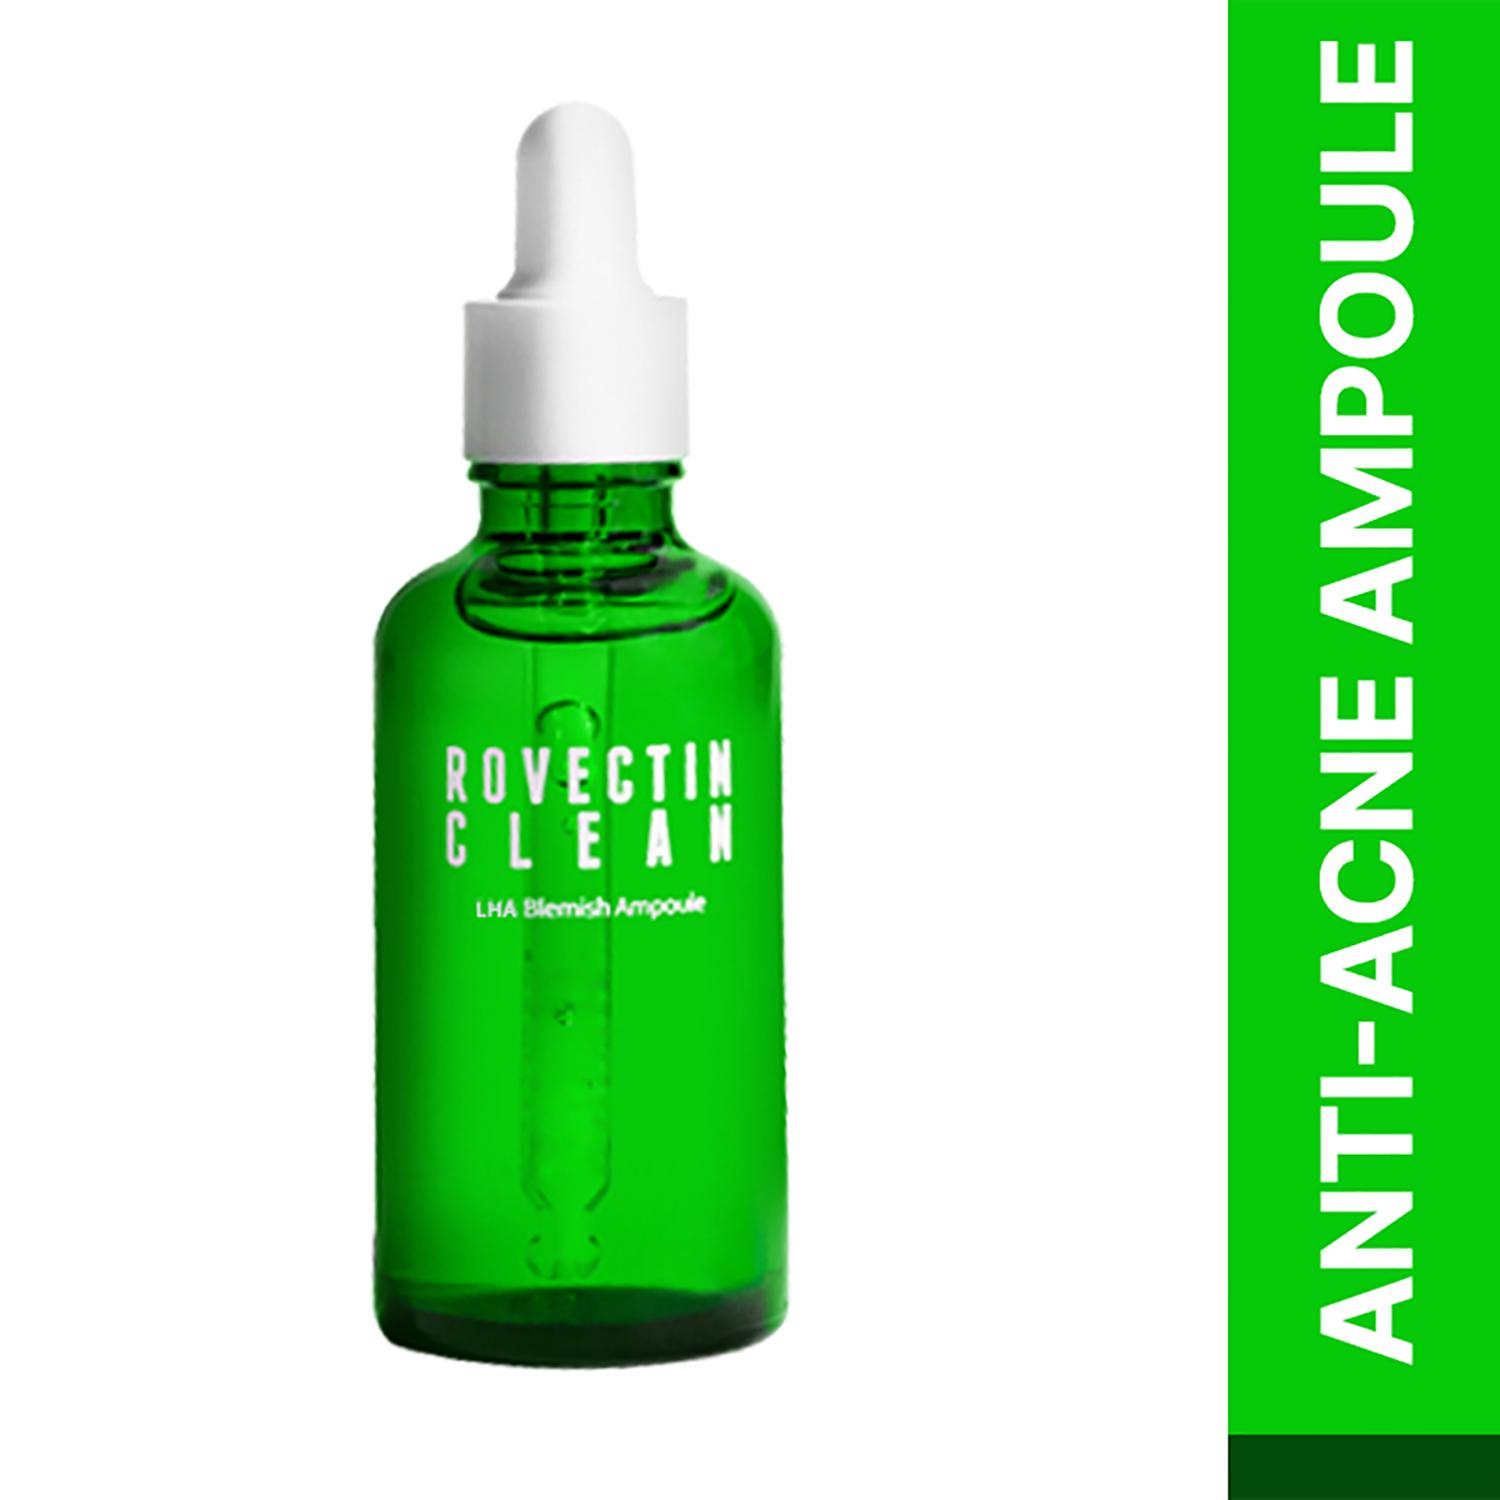 Rovectin | Rovectin Clean LHA Blemish Ampoule (50ml)